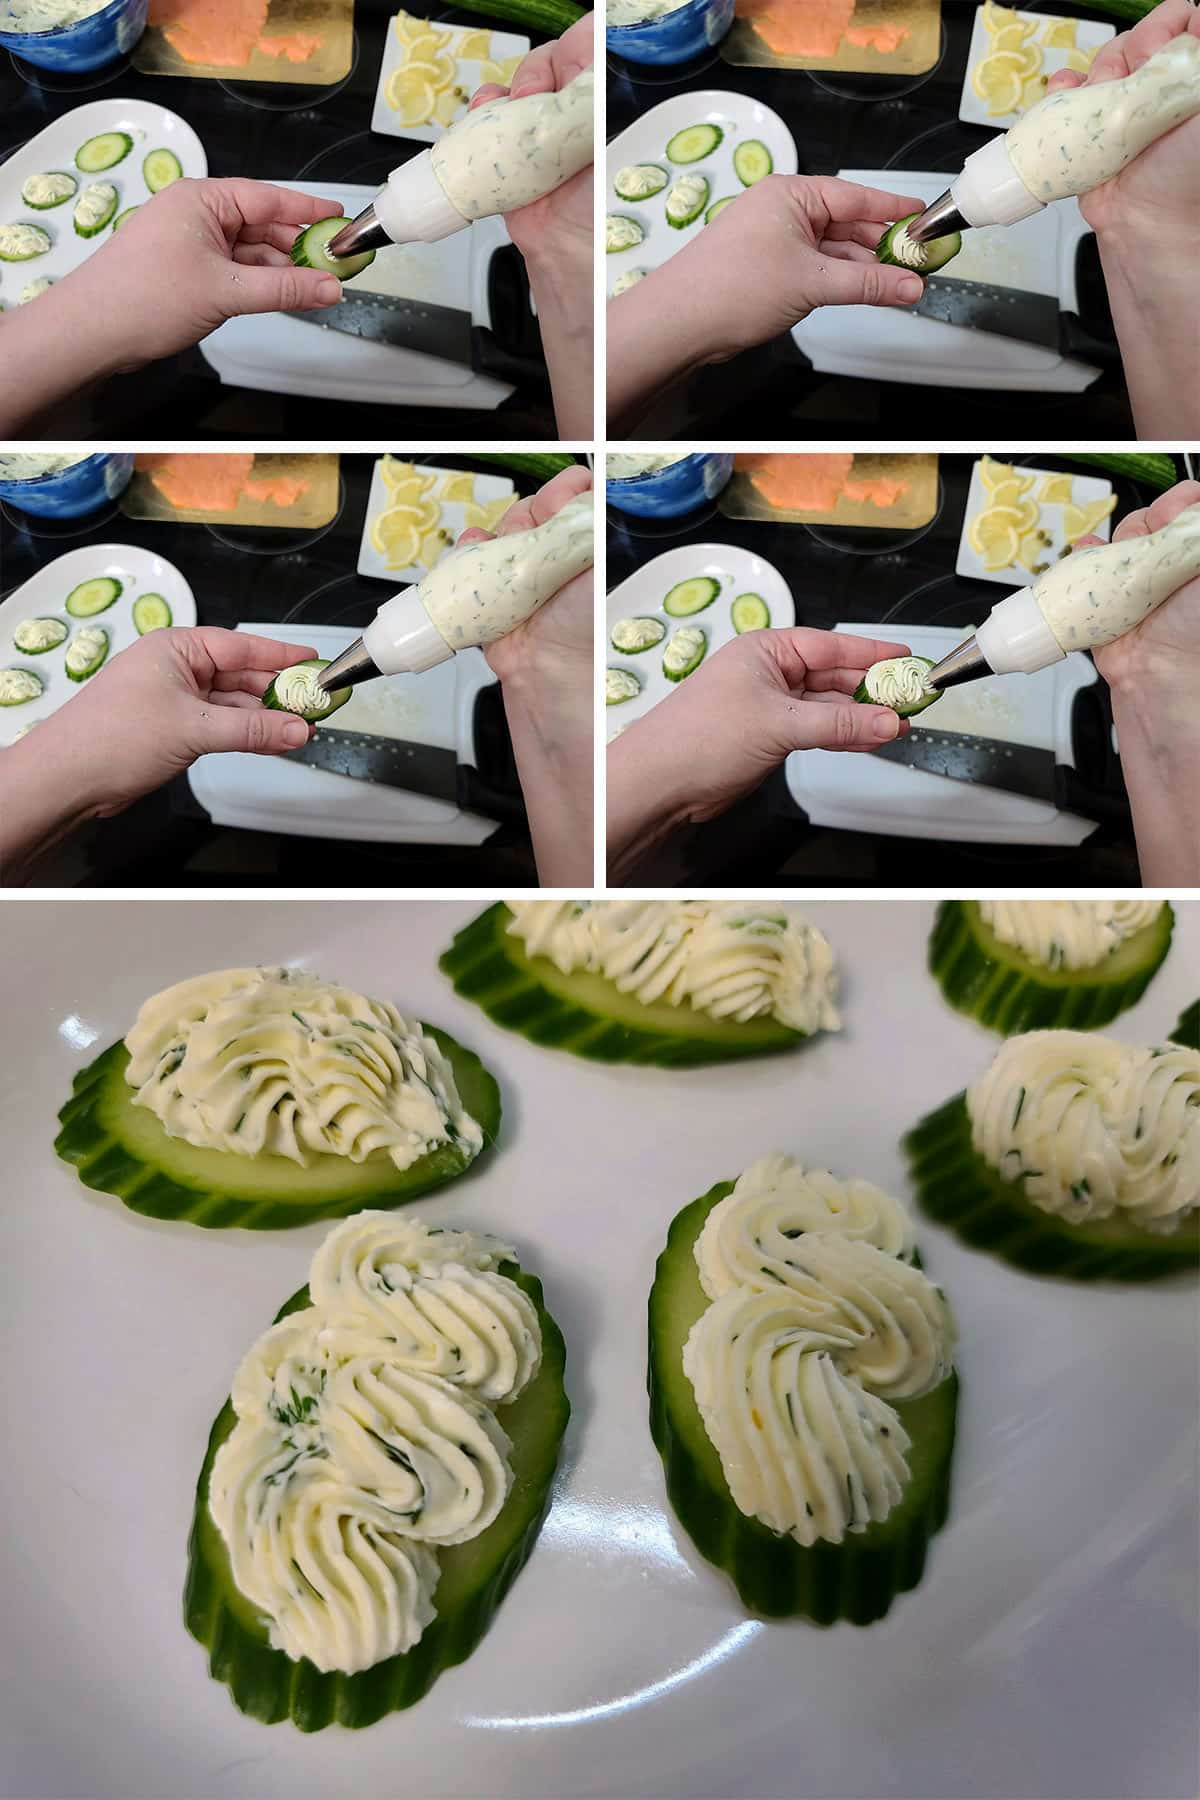 A 5 part image showing a swirls of cream cheese being piped onto cucumber slices.